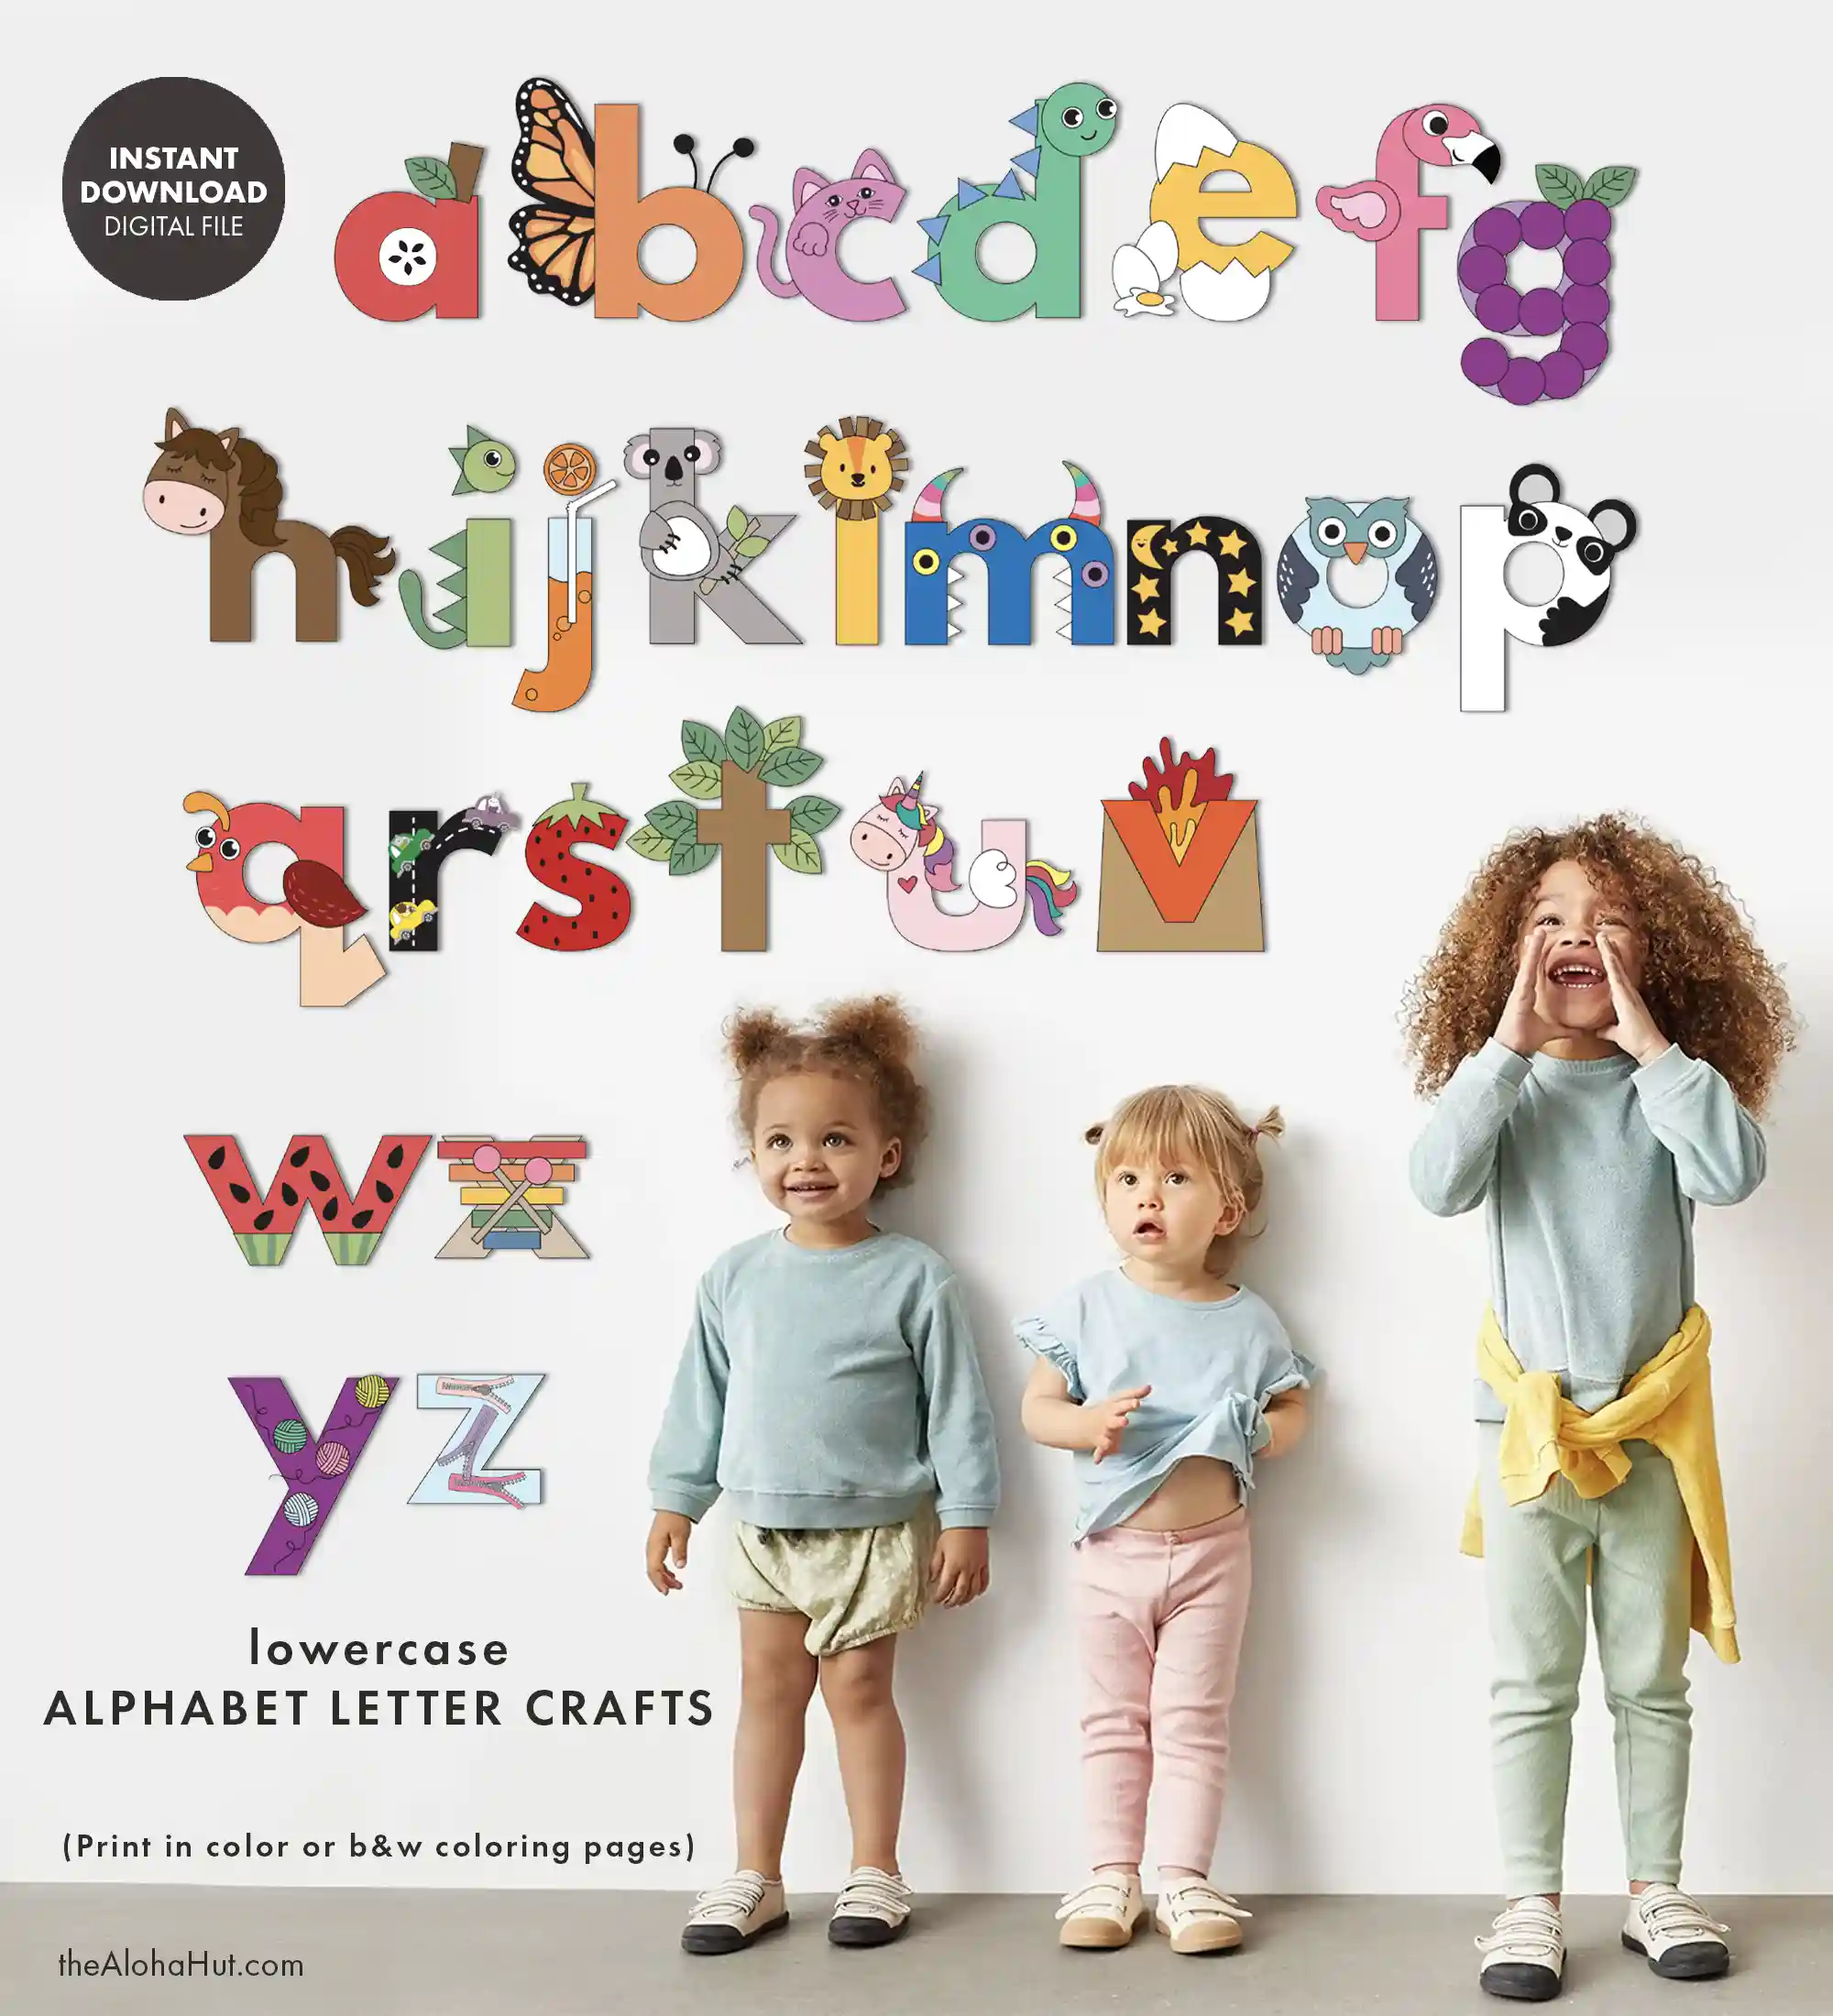 Lowercase alphabet letter crafts for kids, toddlers, and preschool children. Download, print, color, and assemble the lowercase alphabet letters for a fun and hands on activity to help your toddler or preschooler learn their abcs. Make your own alphabet wall as a fun preschool activity and to add to a DIY alphabet book.